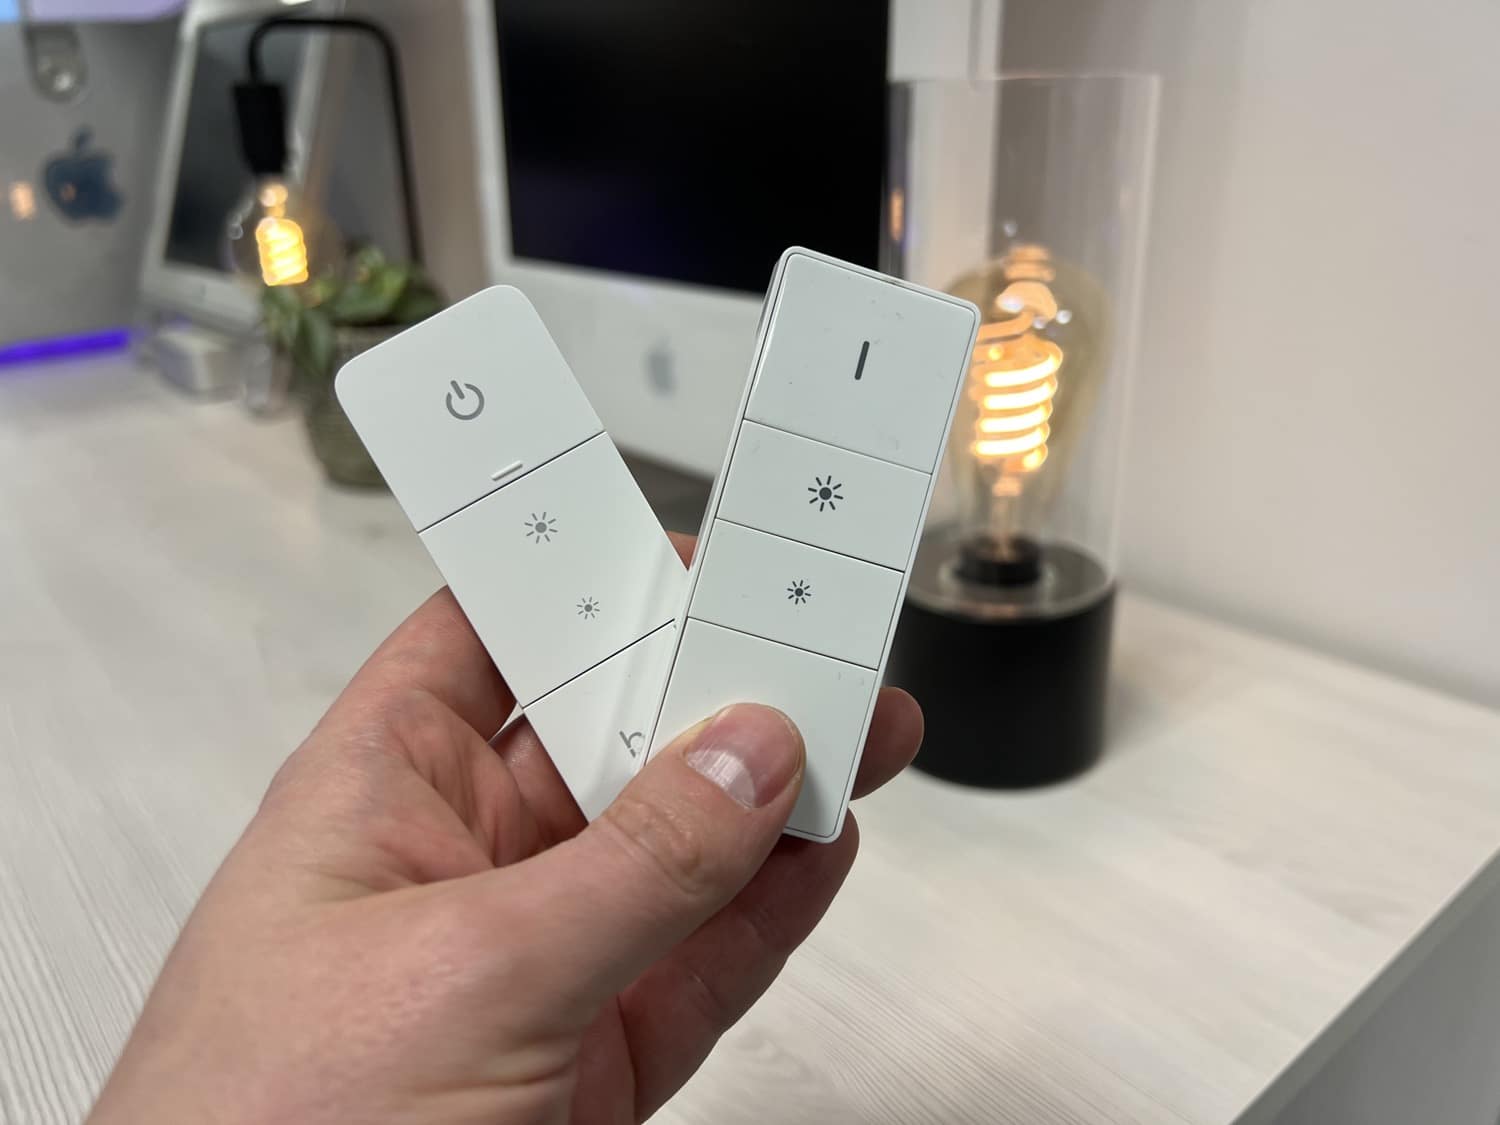 Prestatie leef ermee Arbitrage Resetting Philips Hue lamps with the new dimmer switch - Hueblog.com